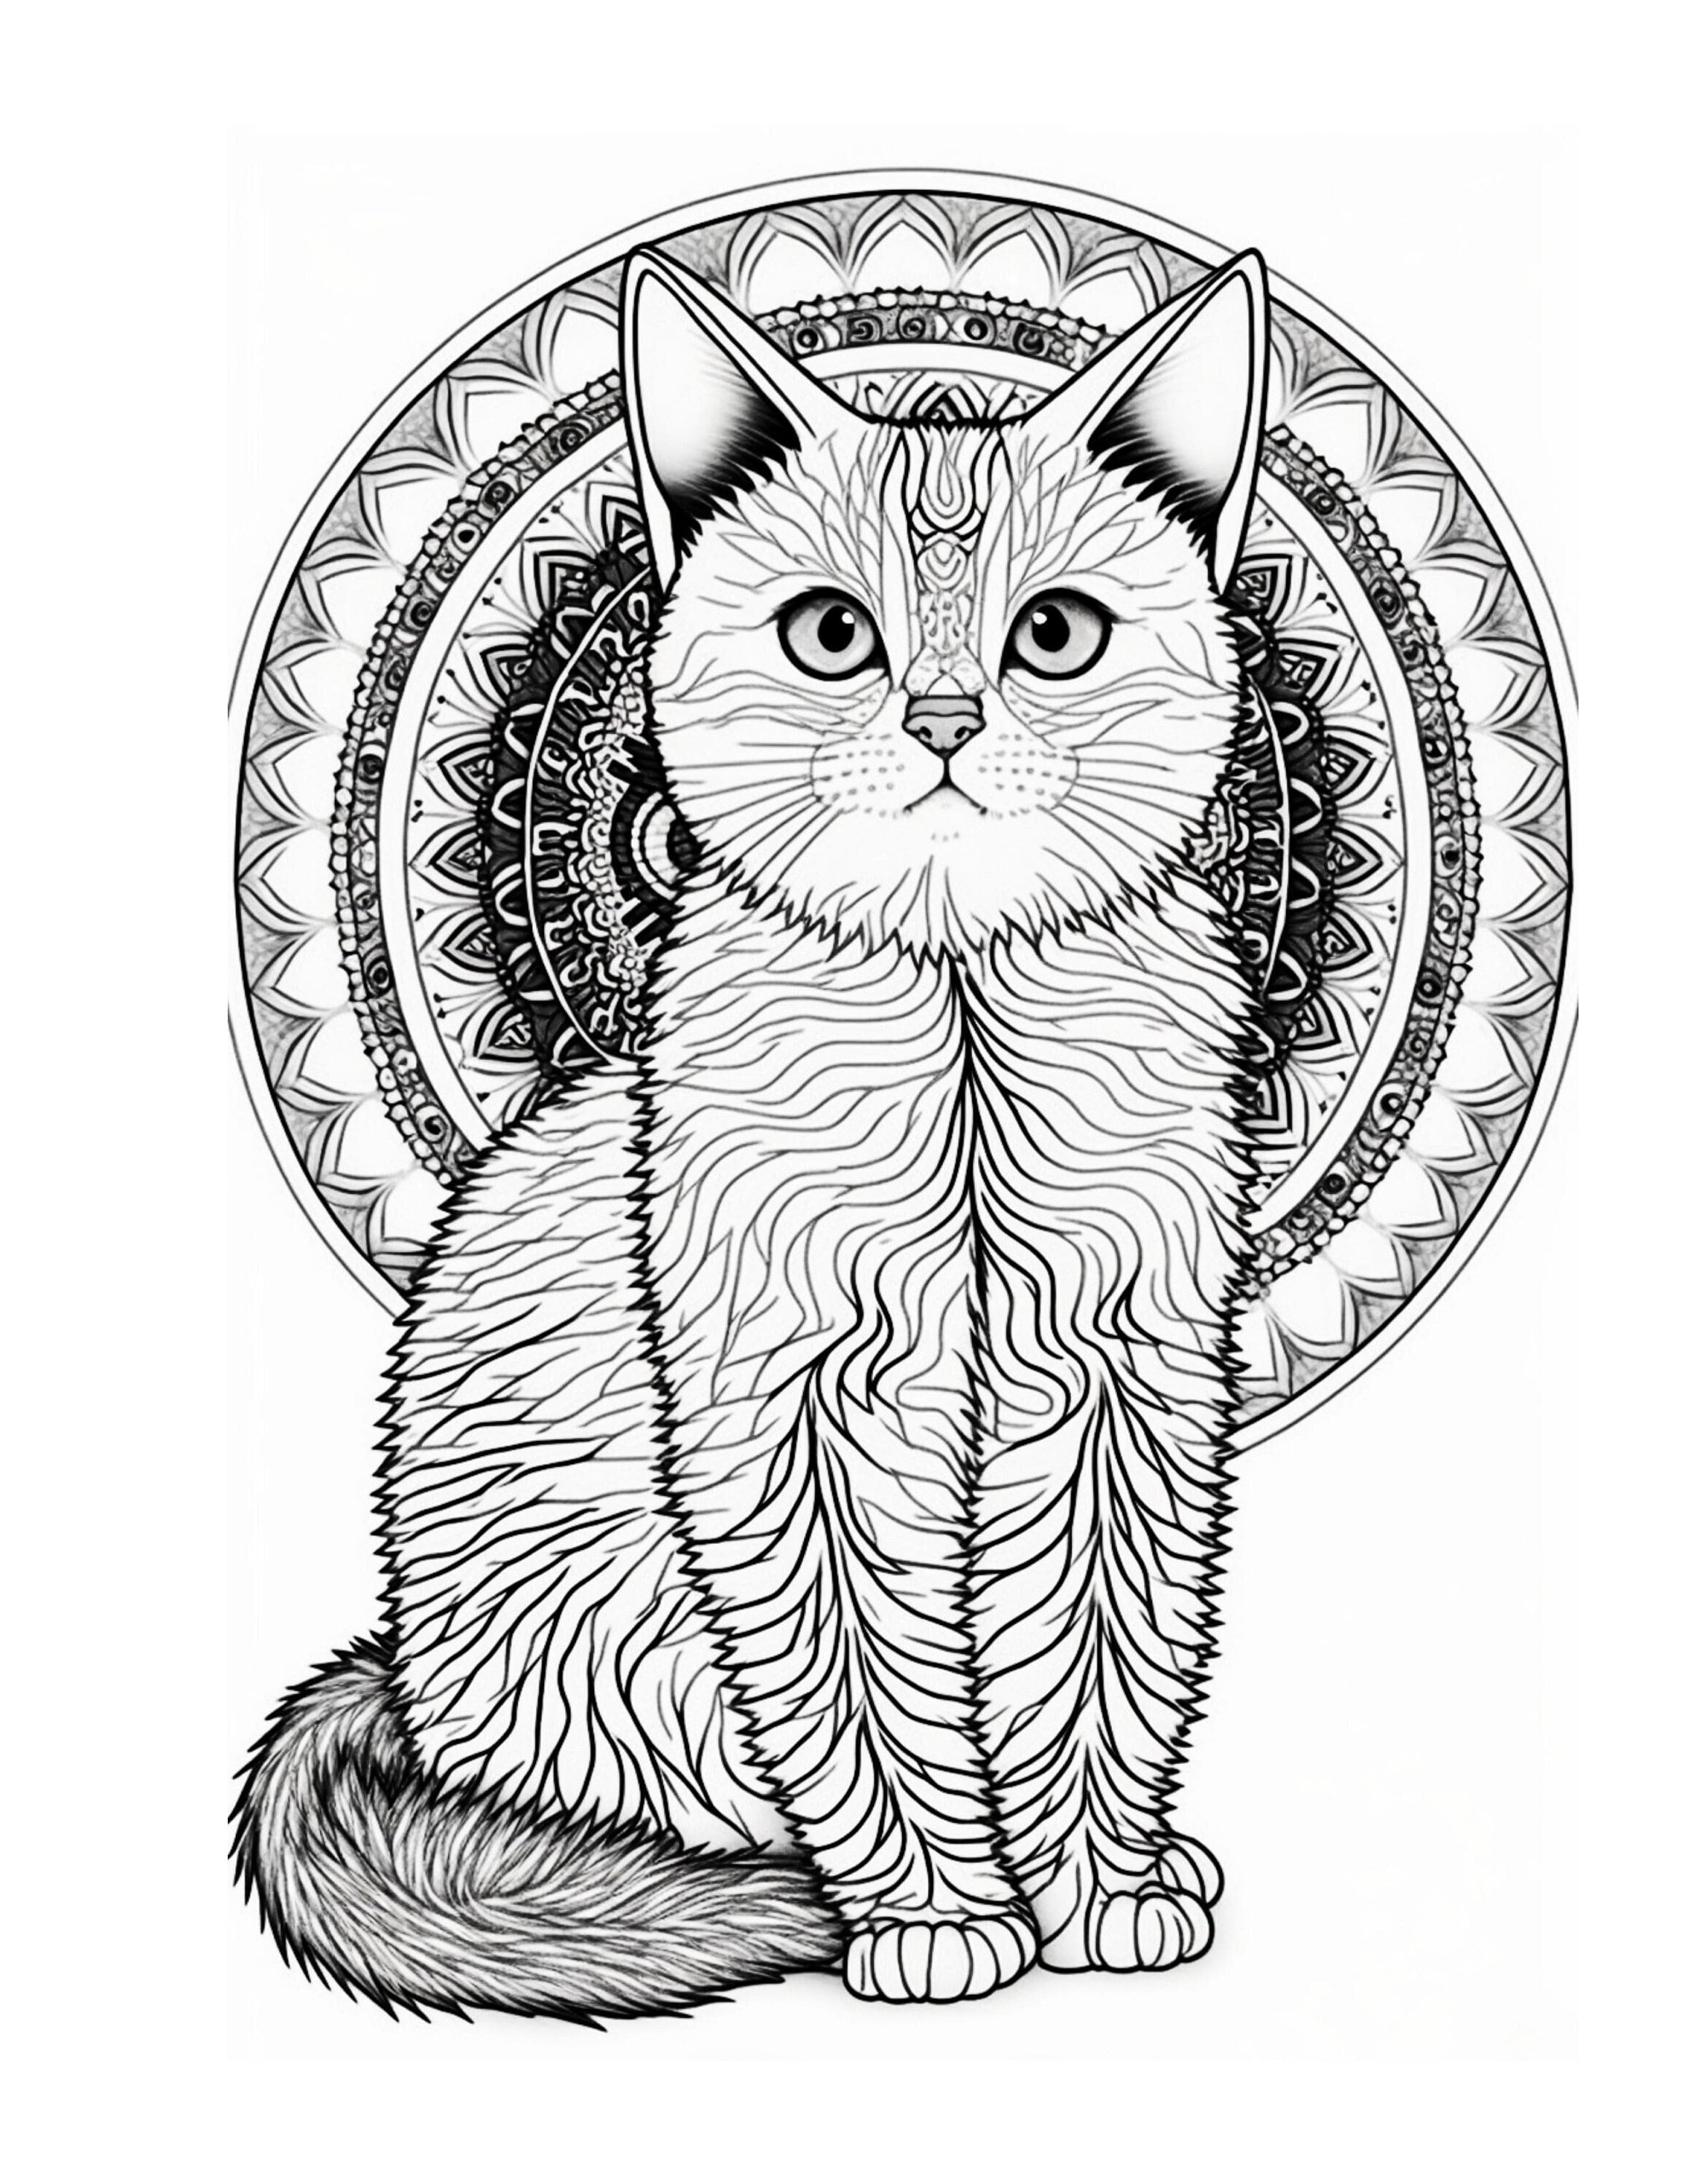 Cat mandala coloring pages i instant download grayscale coloring pages pdf imprimible coloring pages